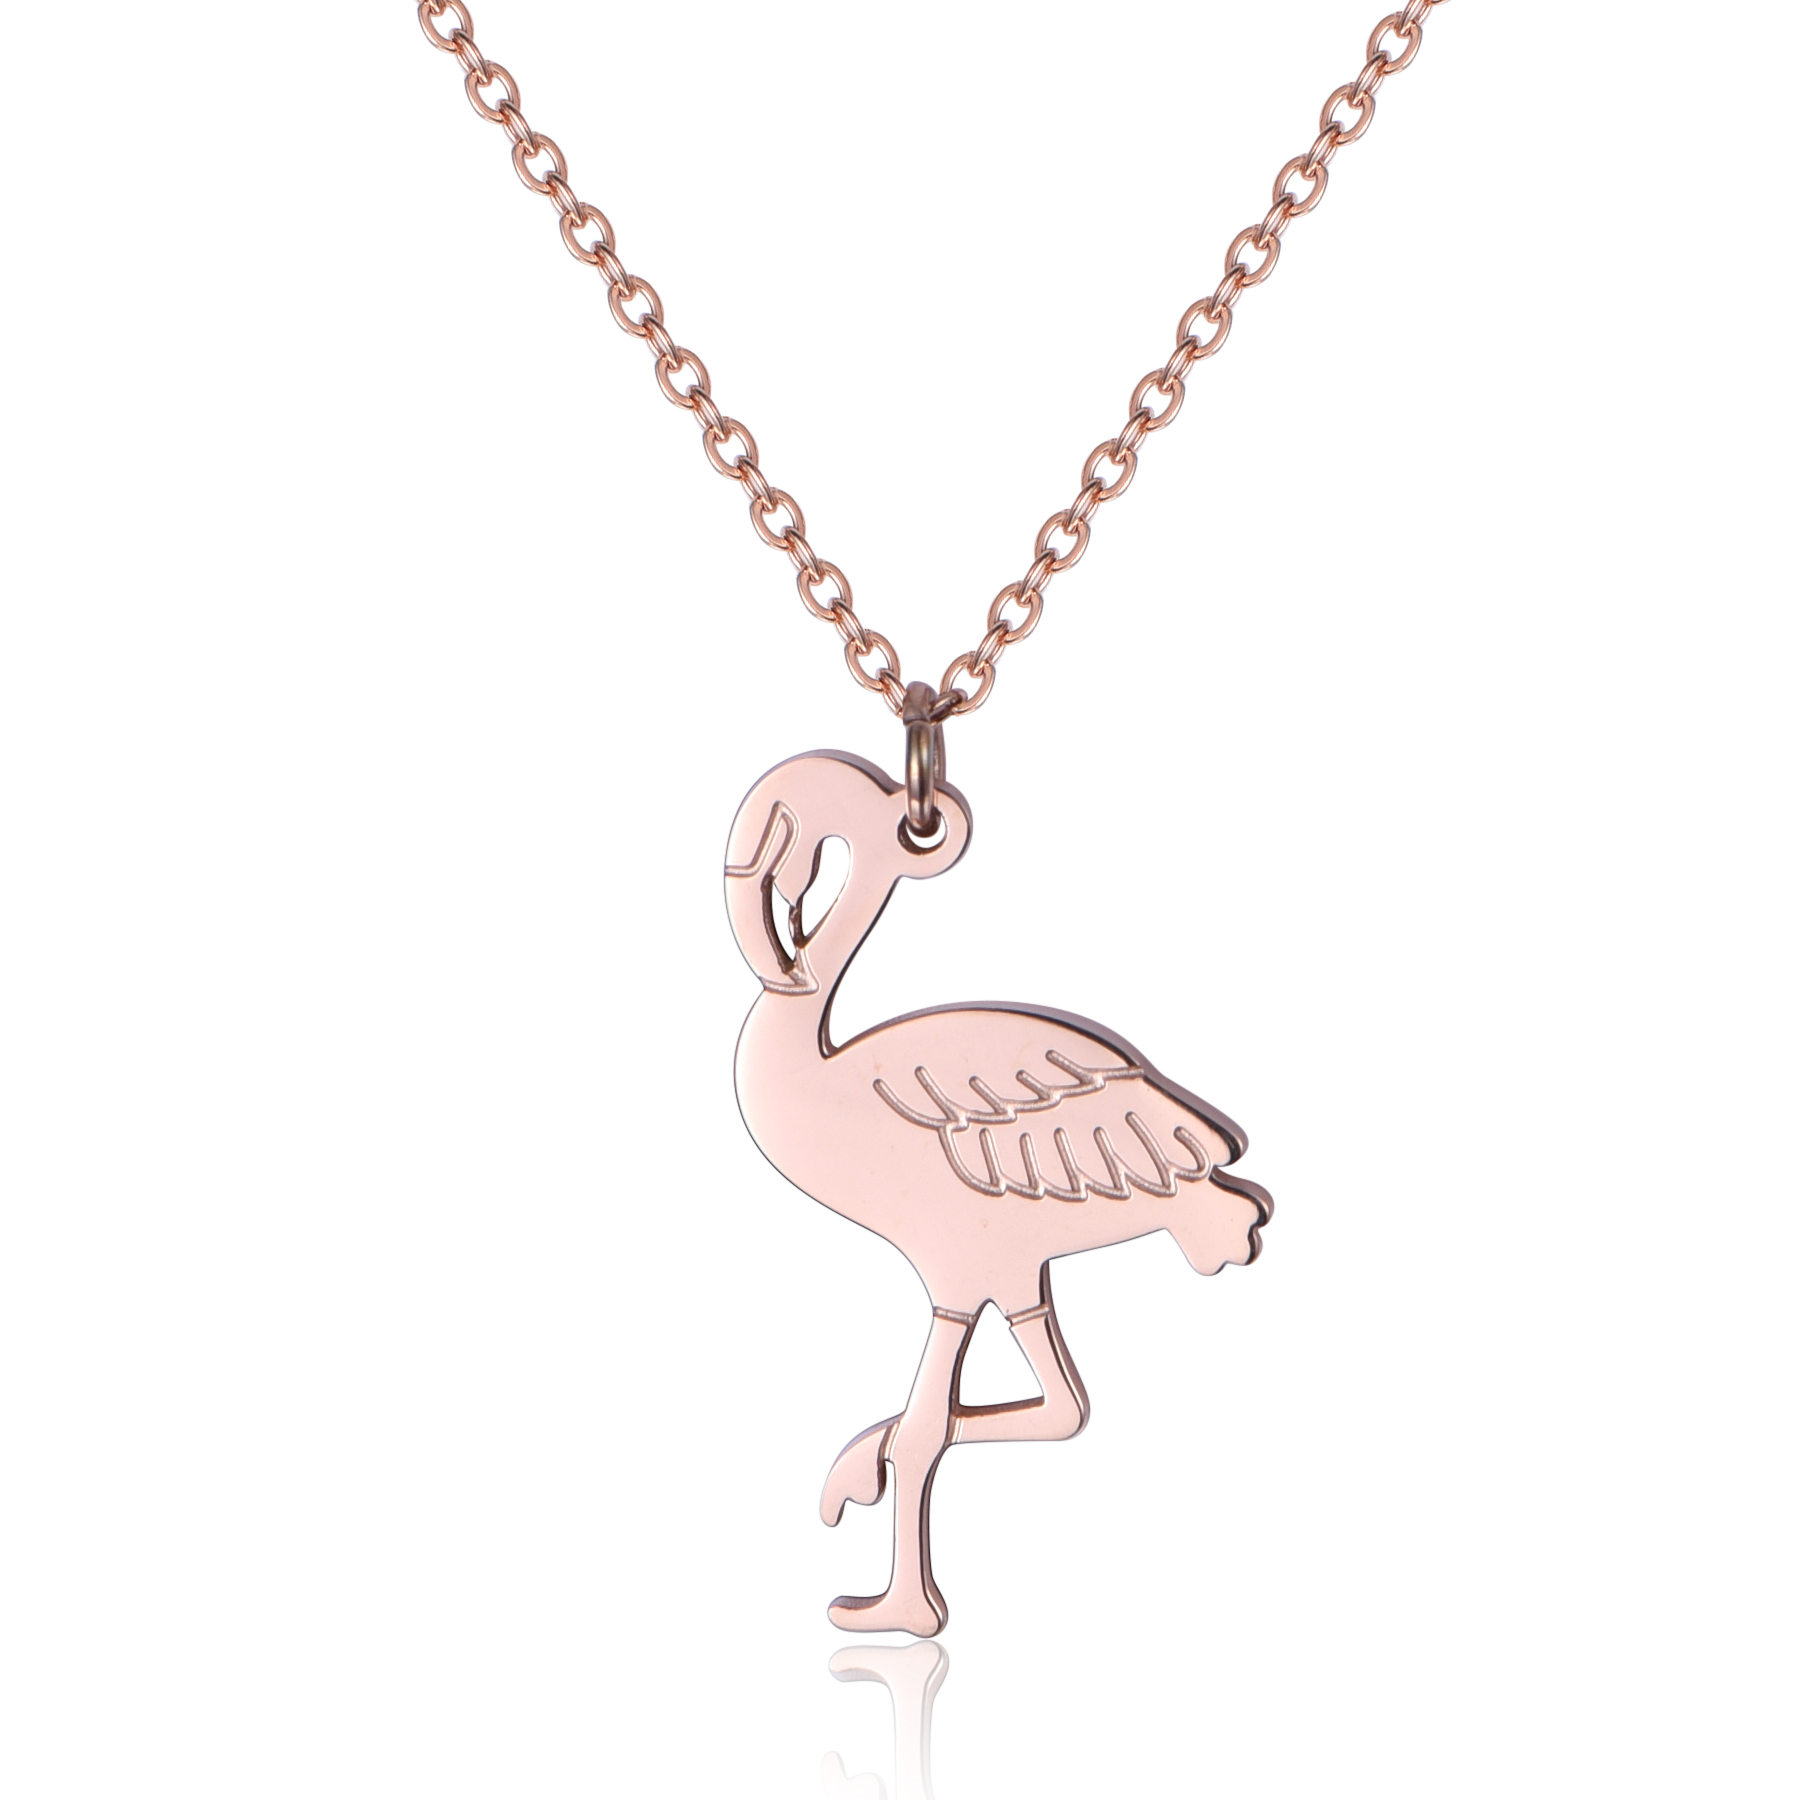 Stainless Steel Solid Rose Gold Flamingo Pendant Necklace NR7-21